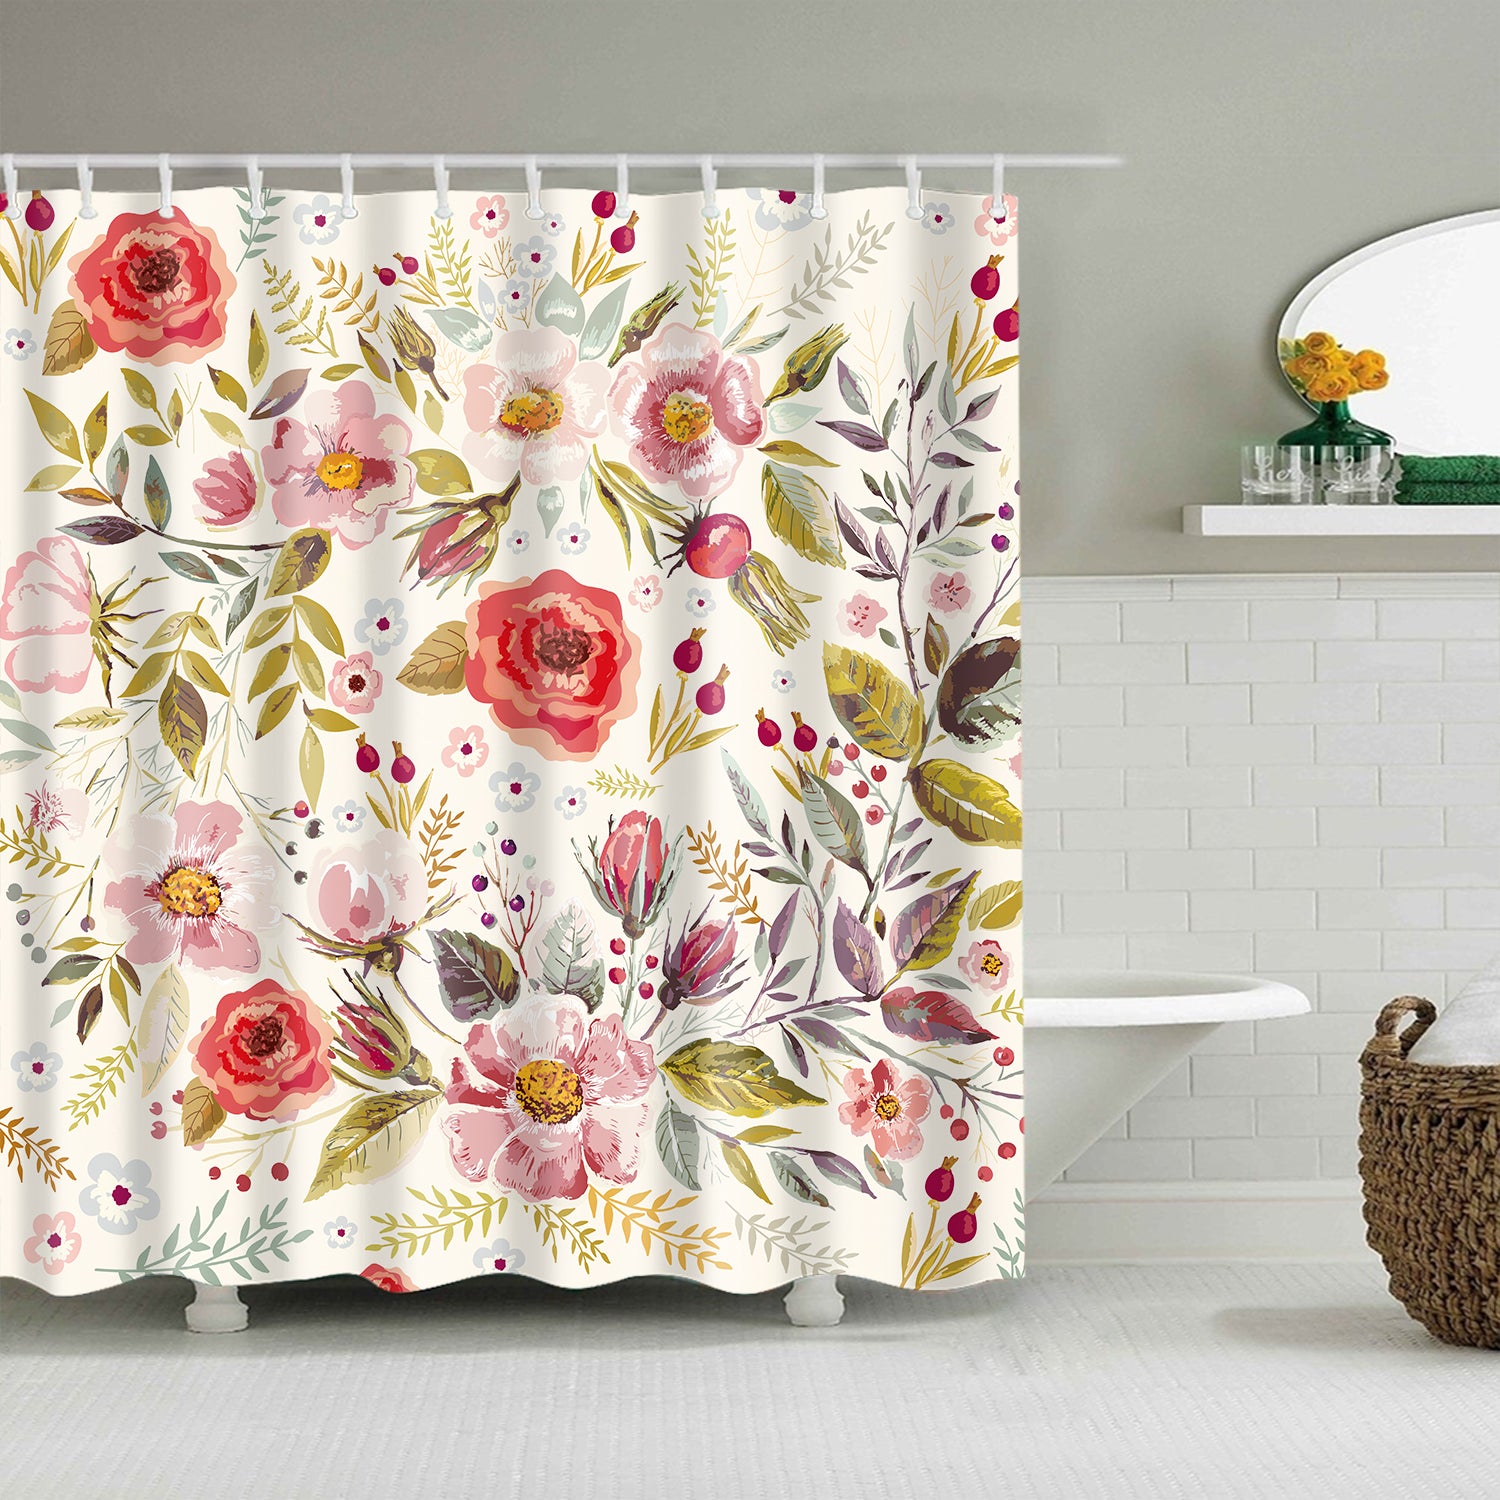 Hand Drawn Floral Romantic Flowers Leaves Shower Curtain